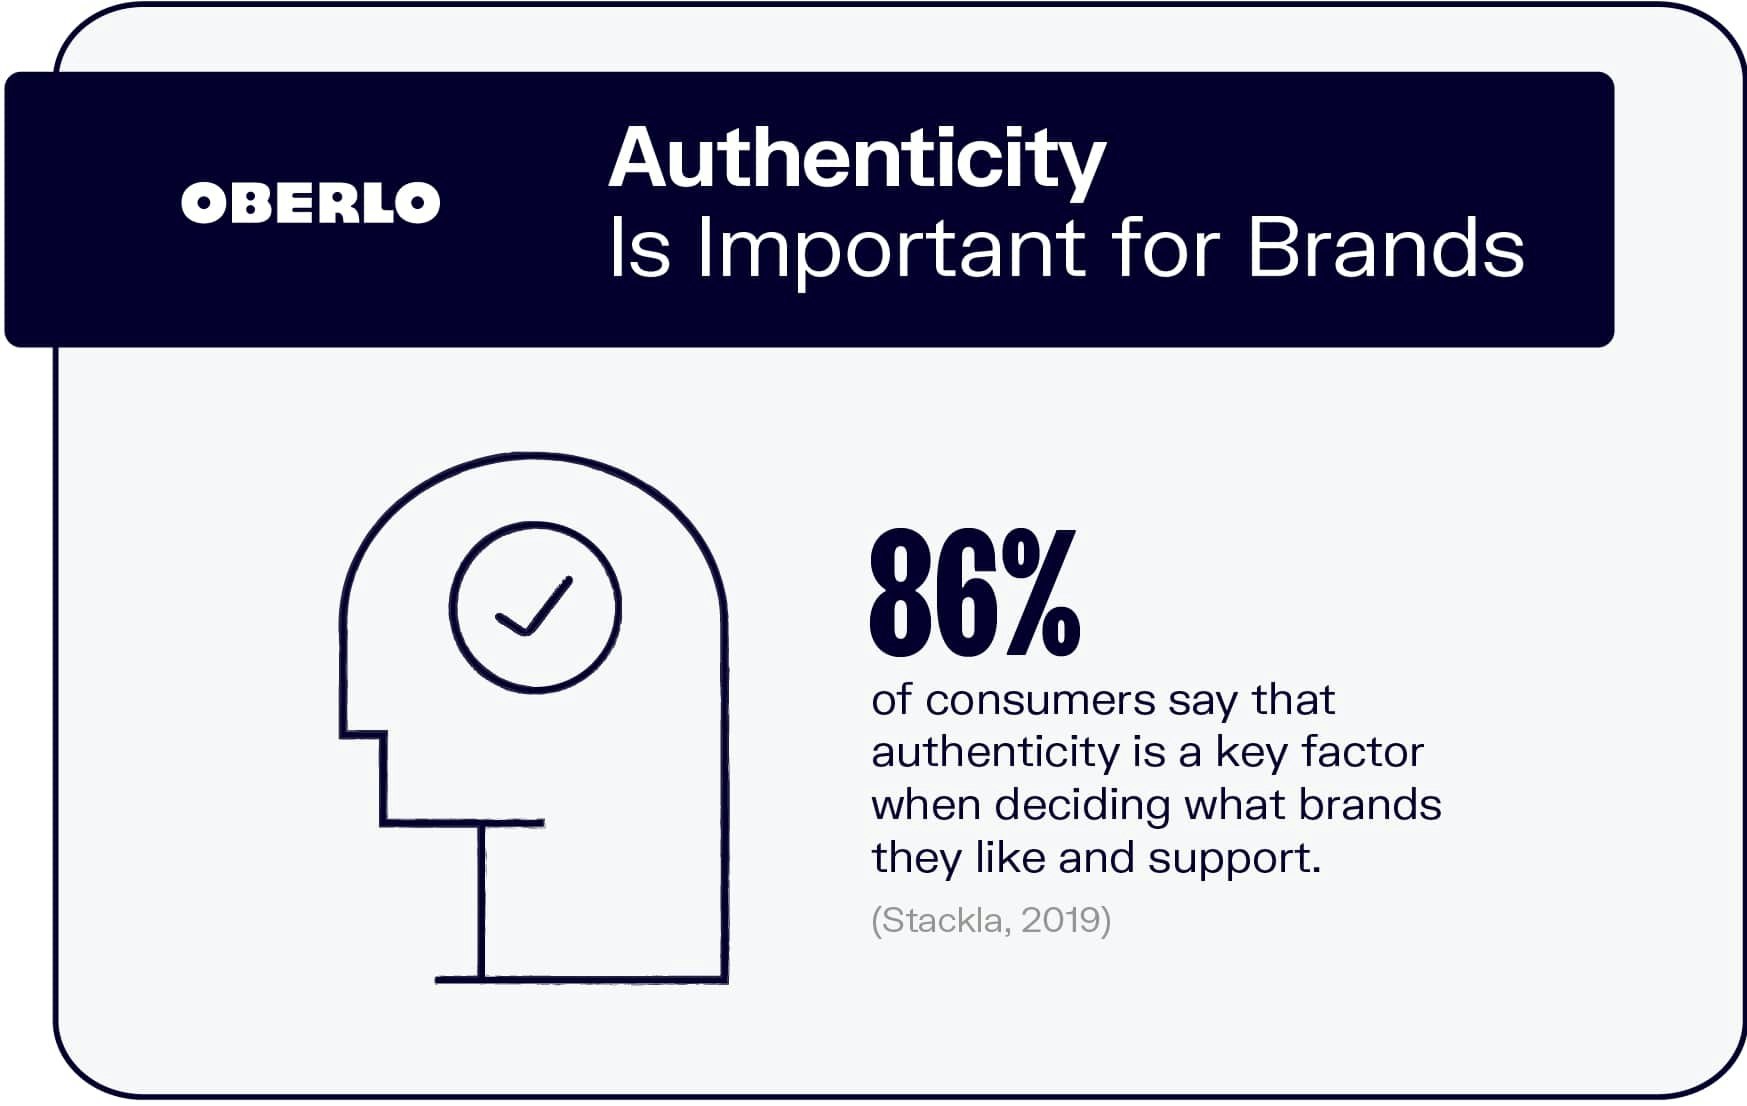 Authenticity Is Important for Brands